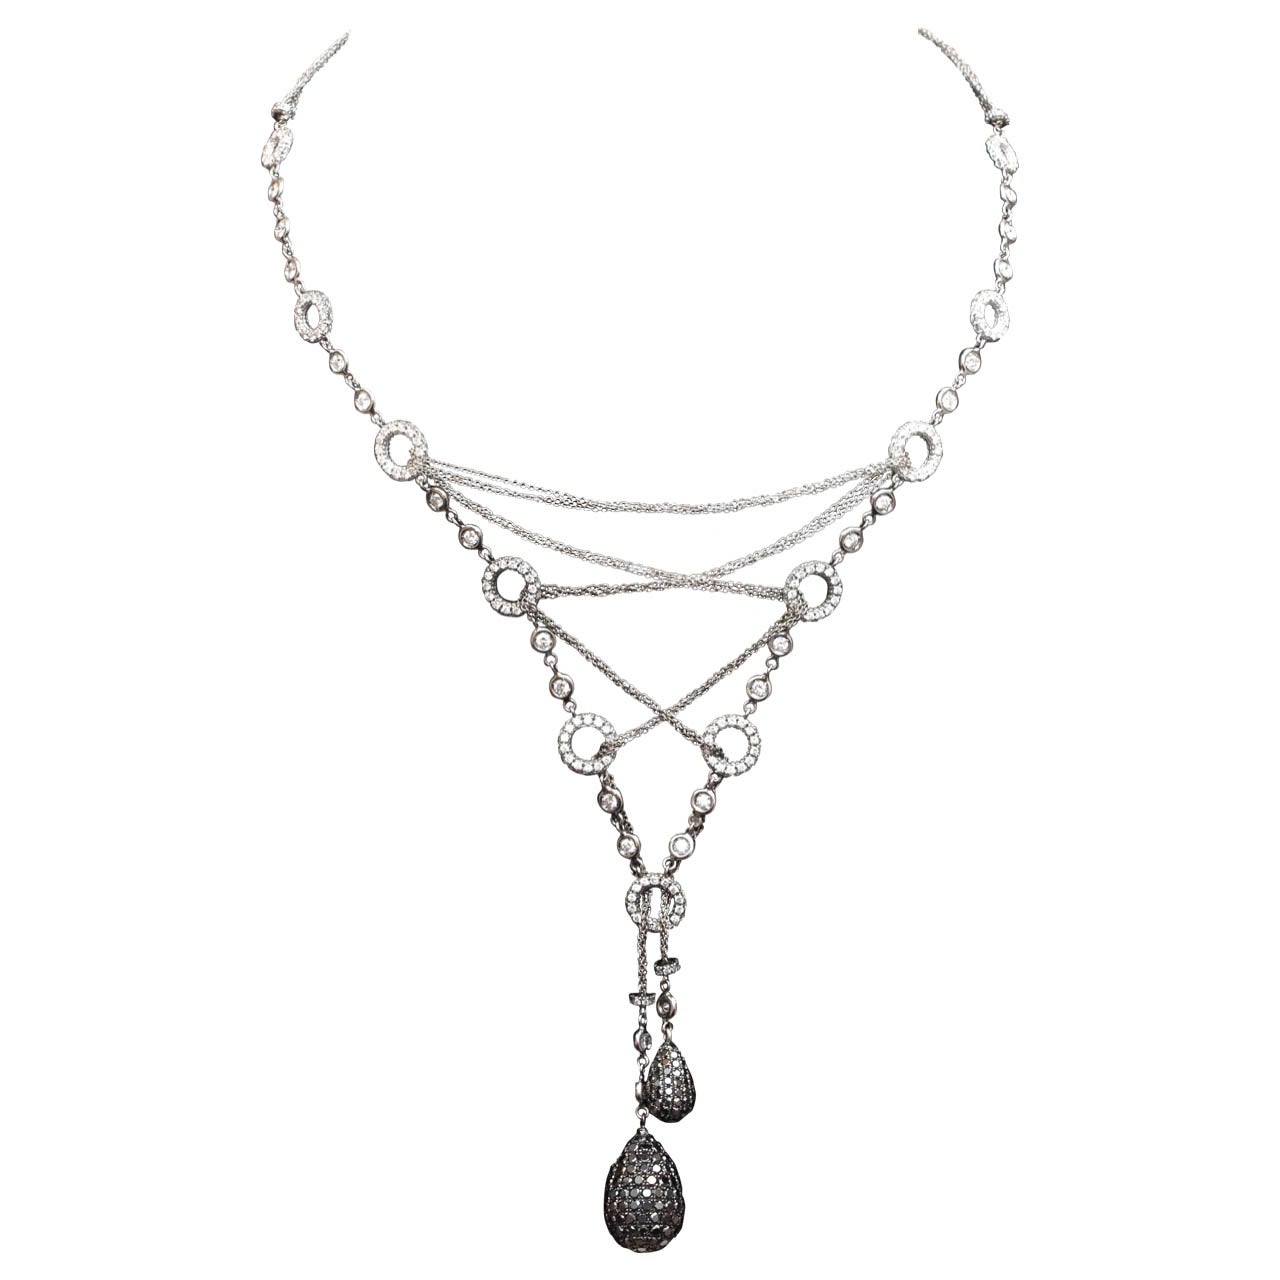 Exceptional Black and White Diamond Necklace at 1stdibs